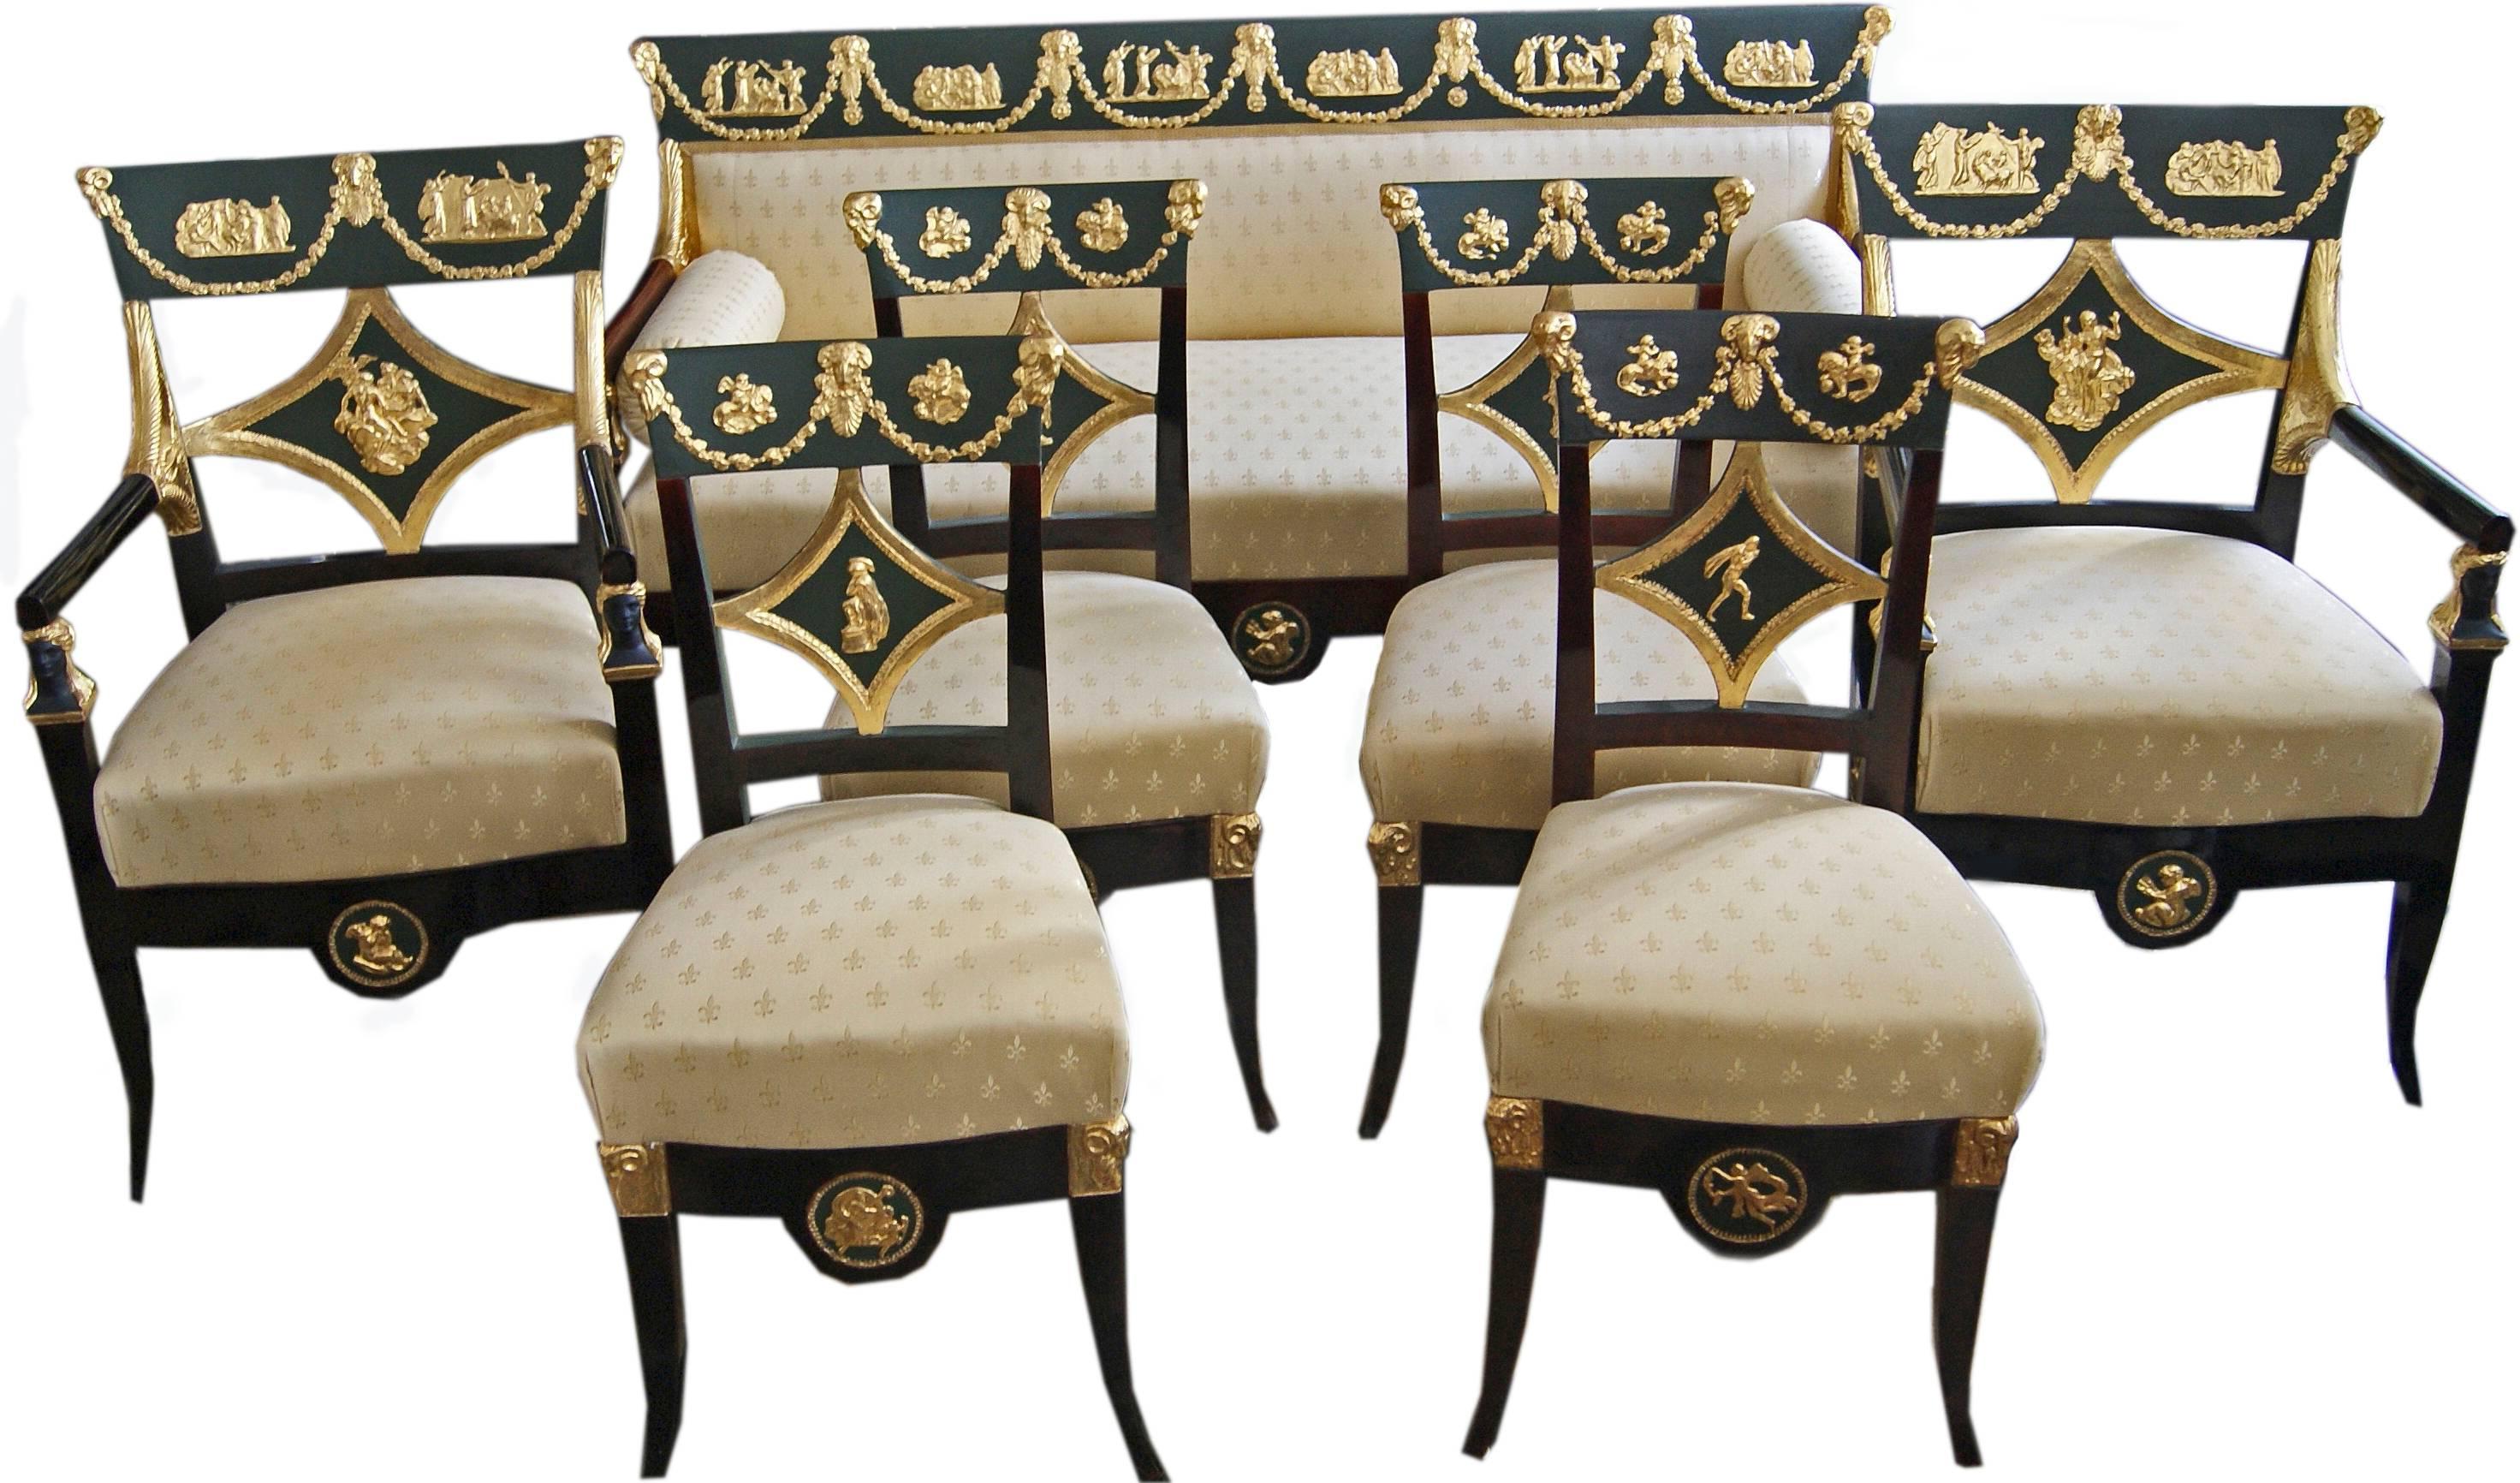 Gorgeous Viennese early Biedermeier Danhauser parlor set, consisting of
° two easy chairs with arms
° four chairs
° a settee
All of them of finest manufacturing quality.

Made by Josef Ulrich Danhauser /Signed (origin / Provenance proved) *